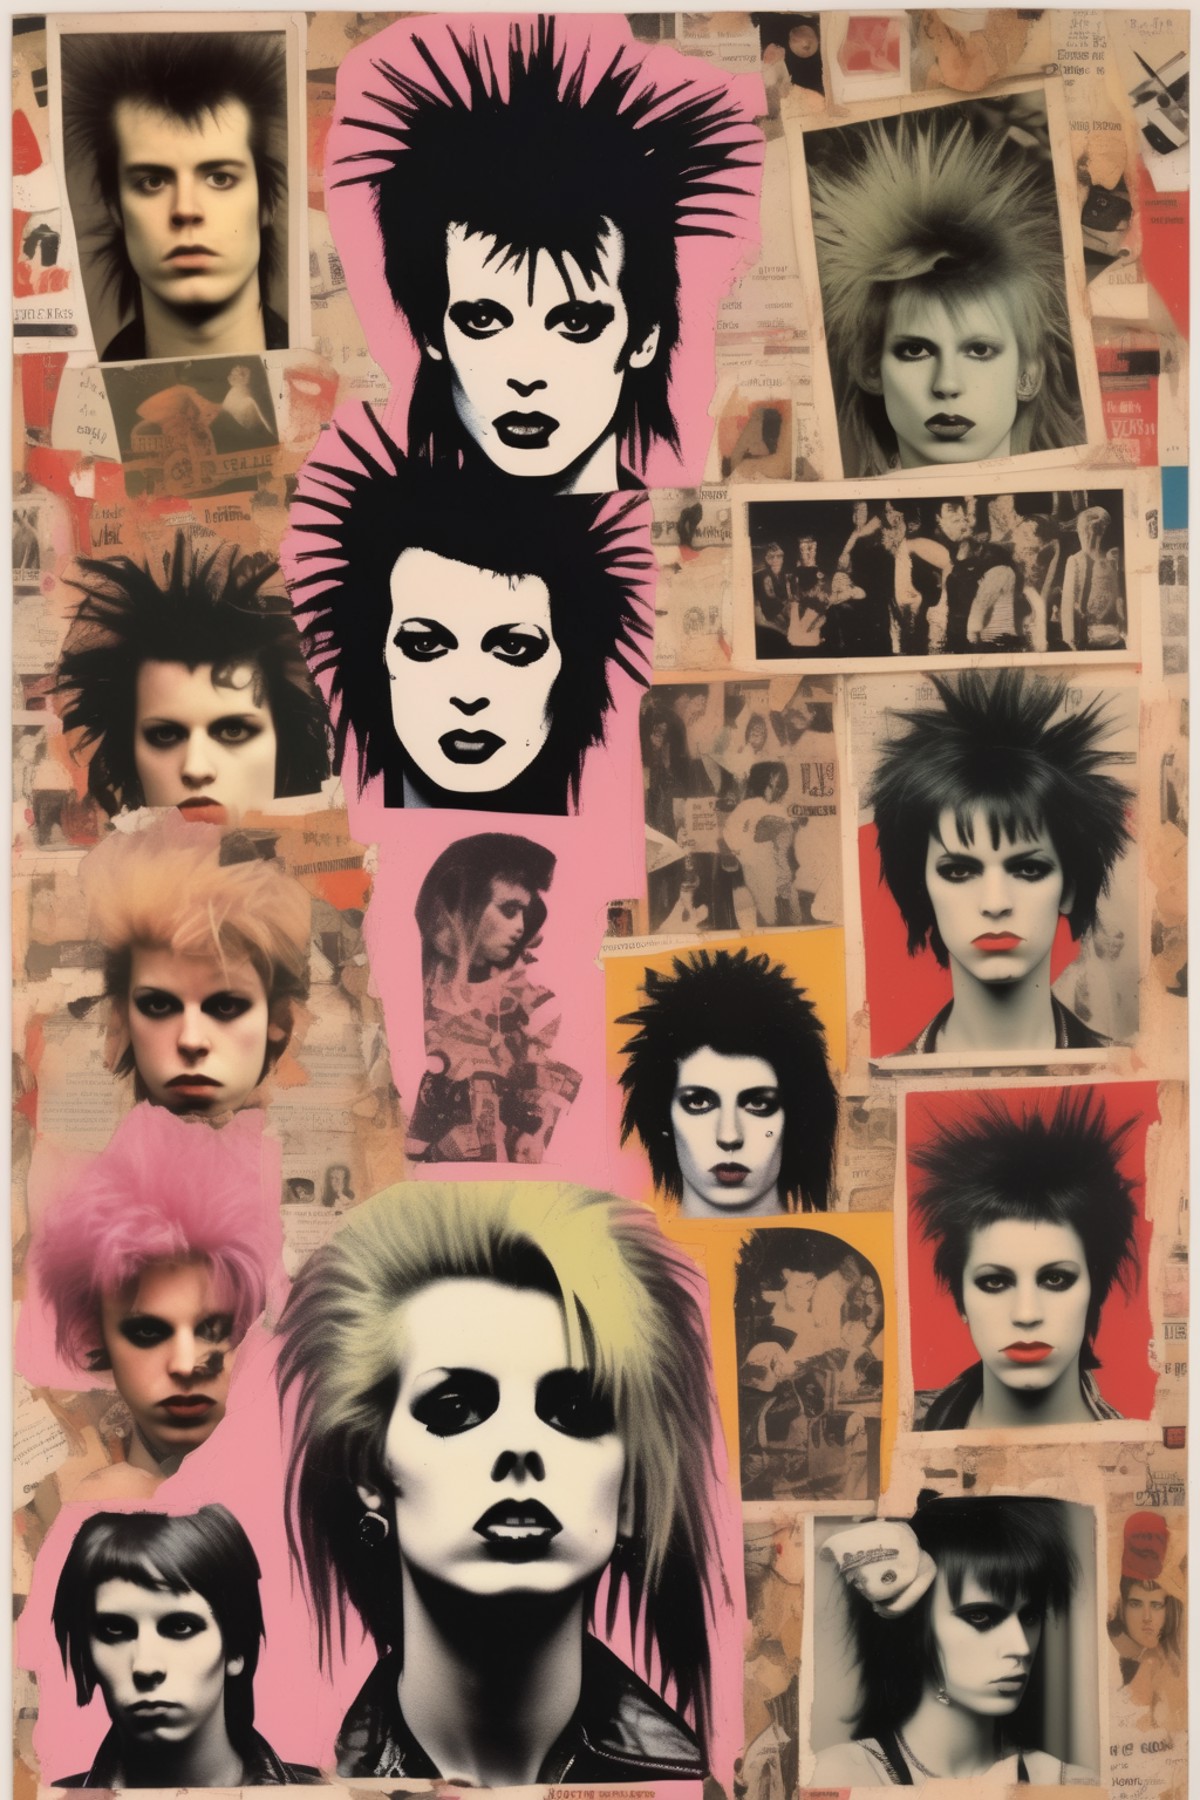 <lora:Punk Collage:1>Punk Collage - a montage of iconography representing late 1970s punk rock